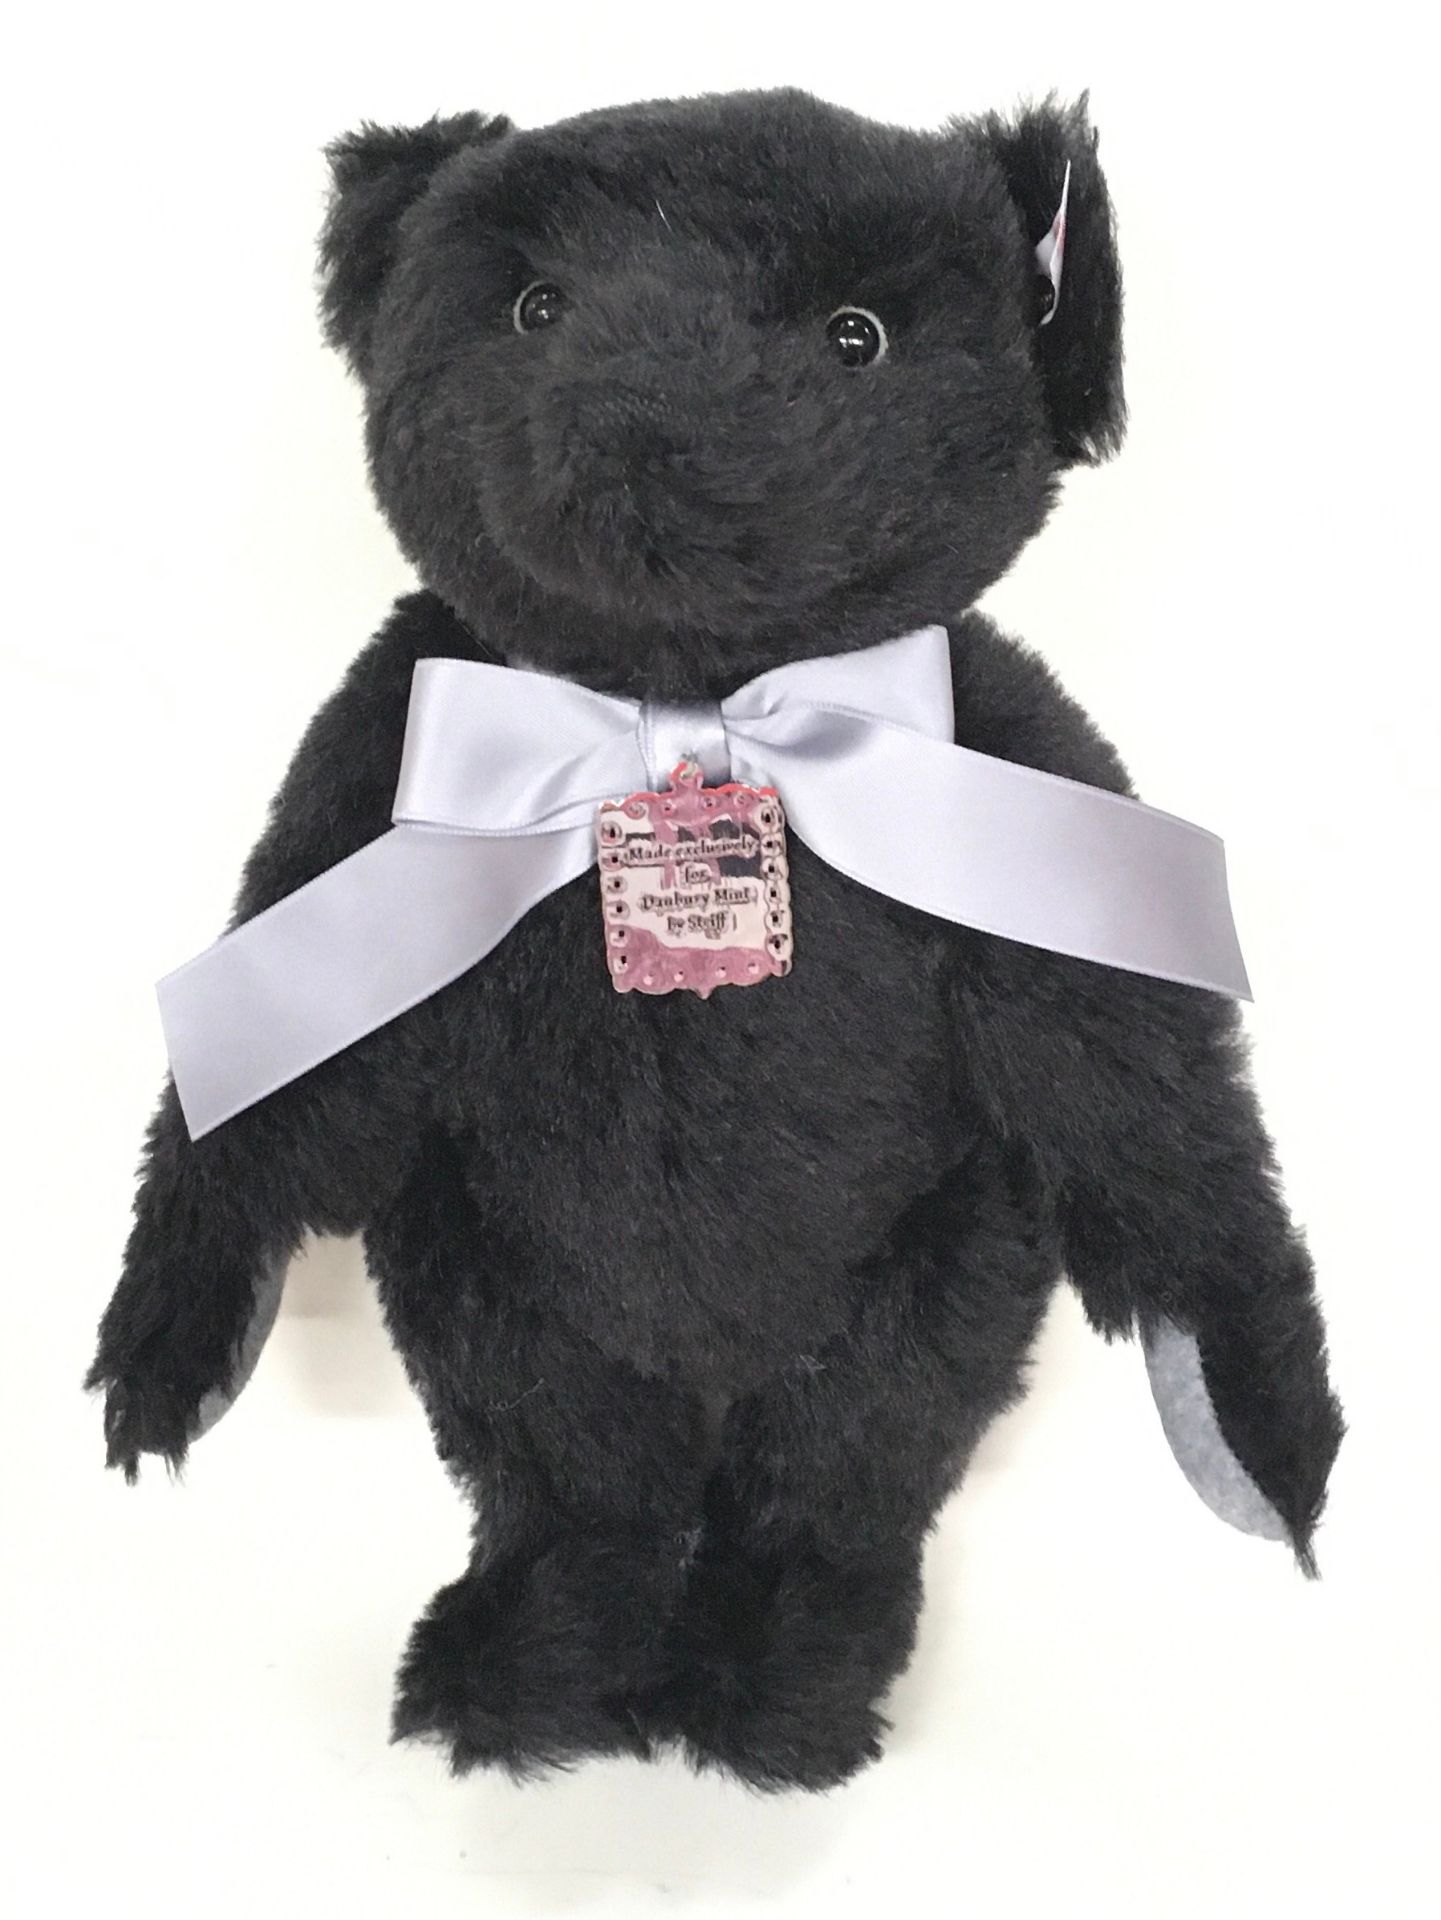 Steiff Victoria the Penny Black Bear, White Tag 690846, black mohair, LE 439 of 1819. Exclusive to - Image 3 of 3